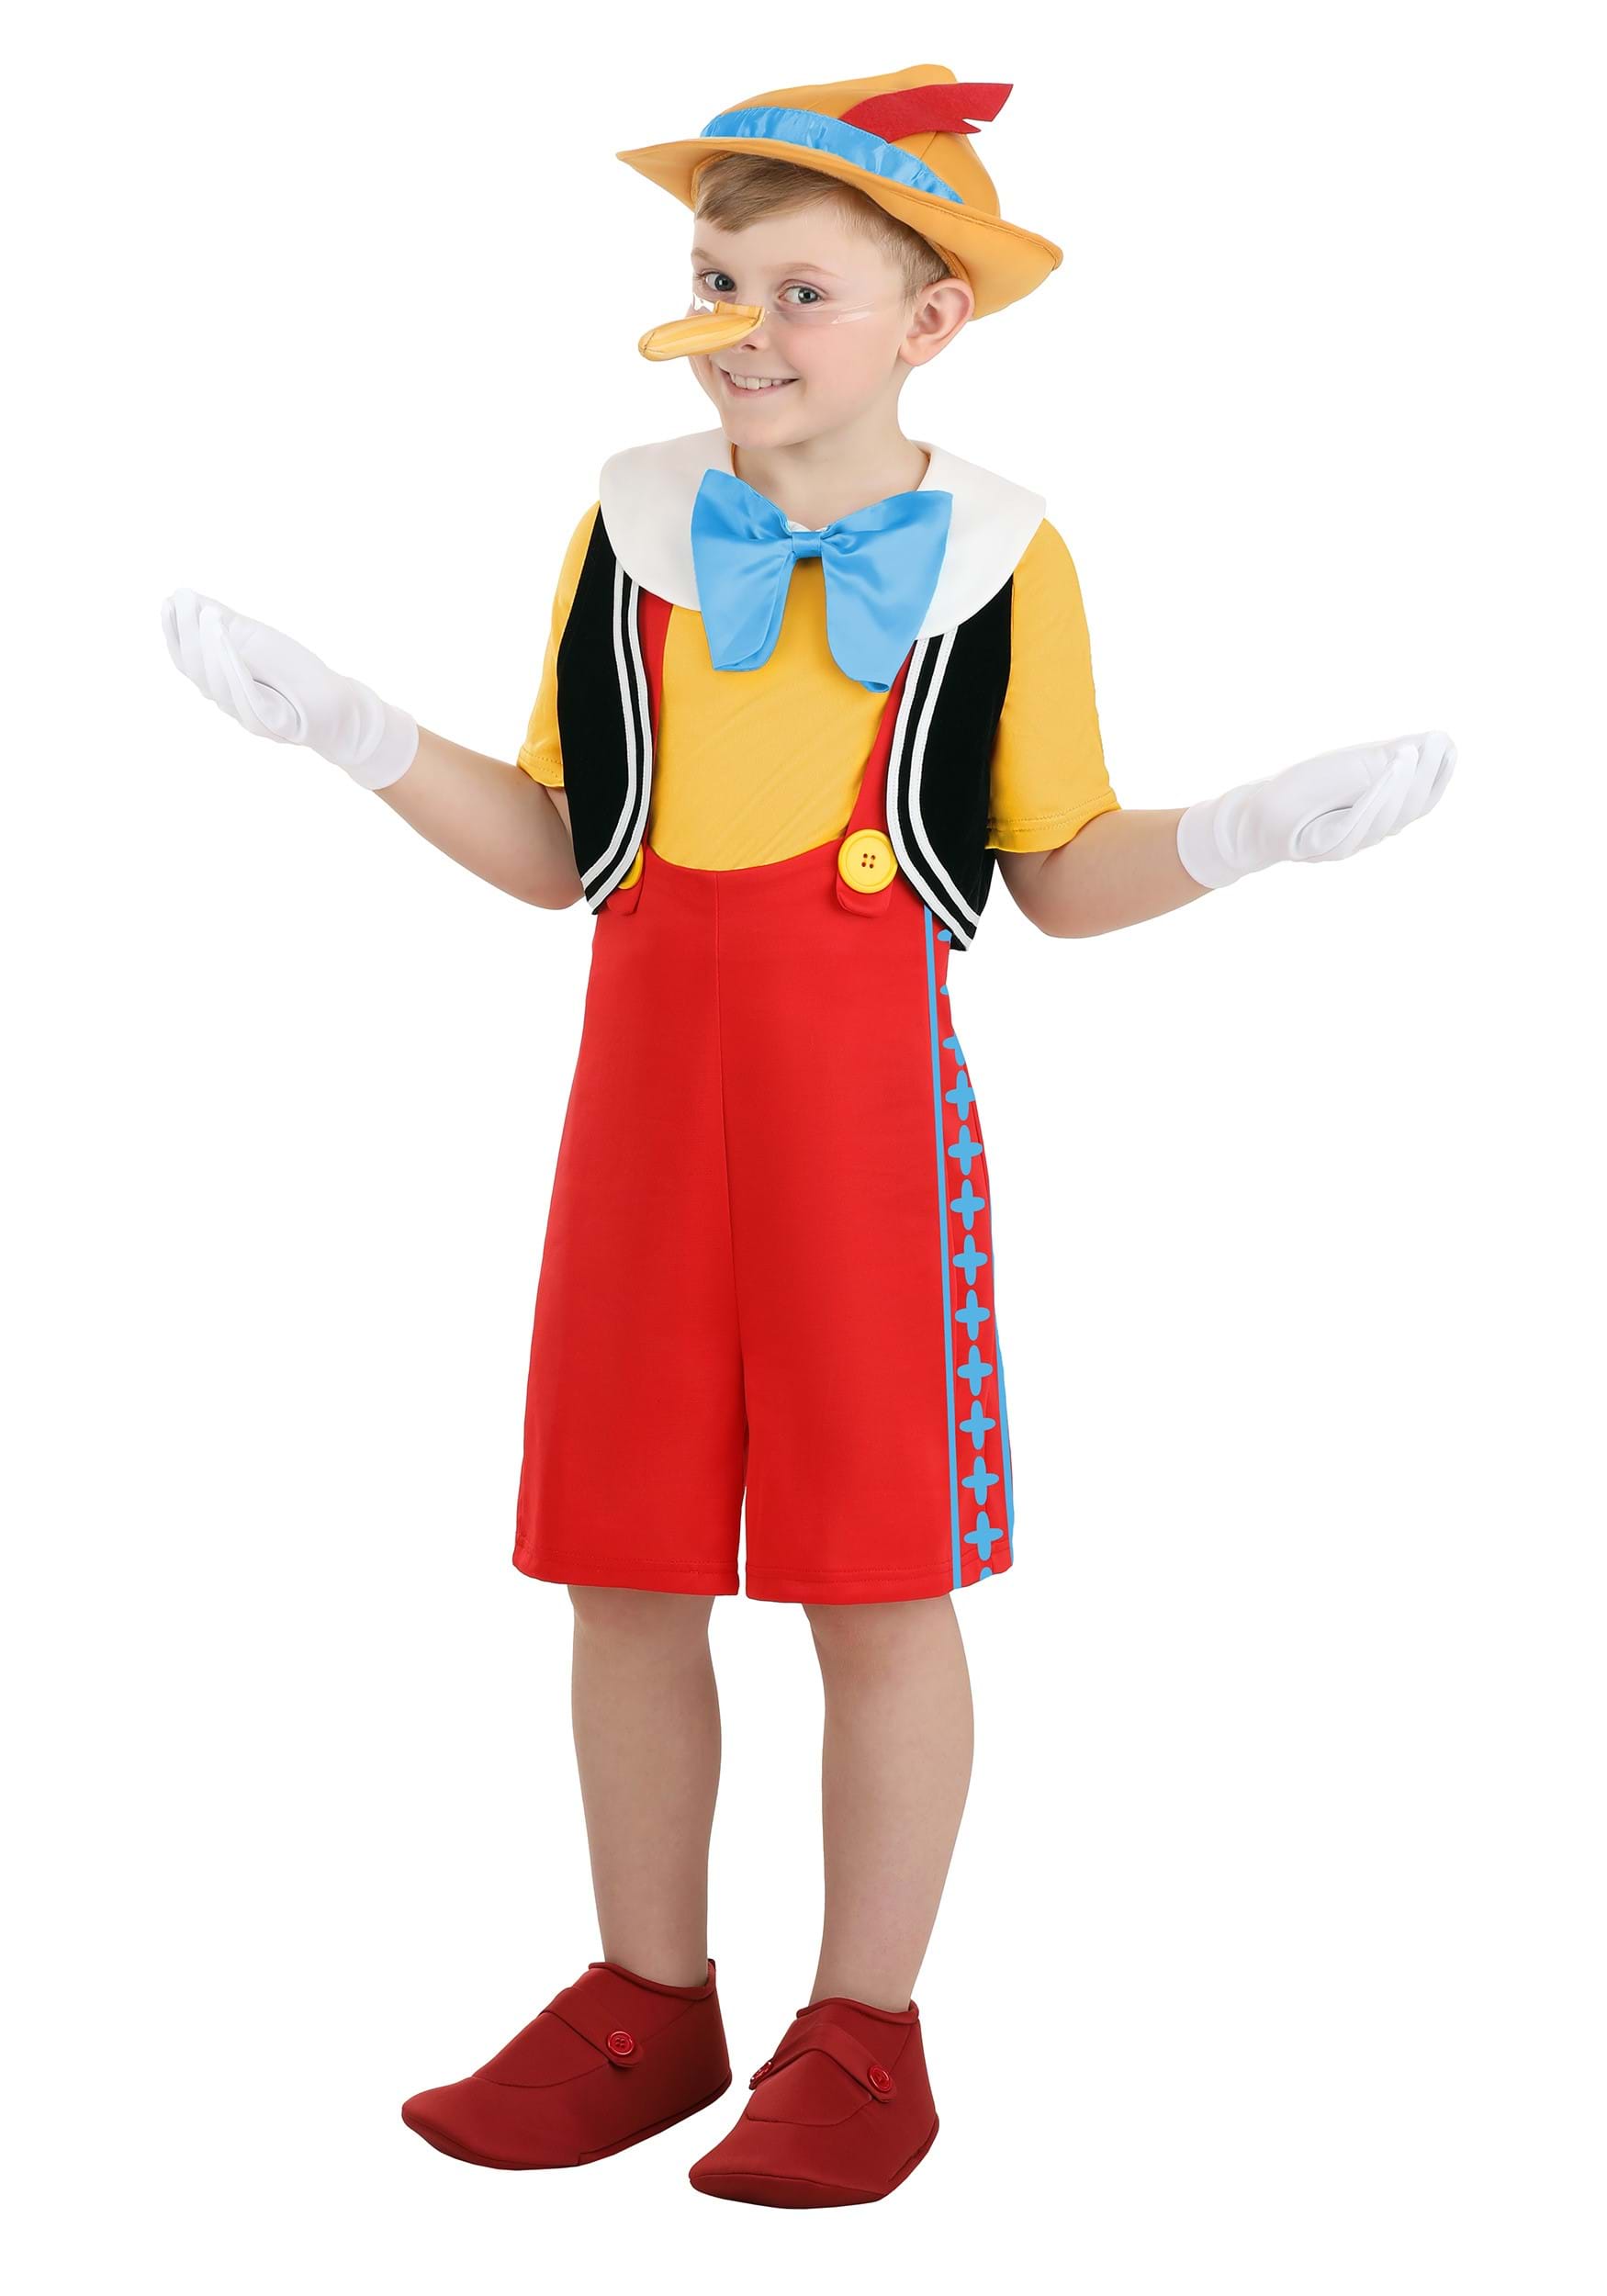 Photos - Fancy Dress Deluxe FUN Costumes  Pinocchio Costume for Kids Blue/Red/Yellow FUN 